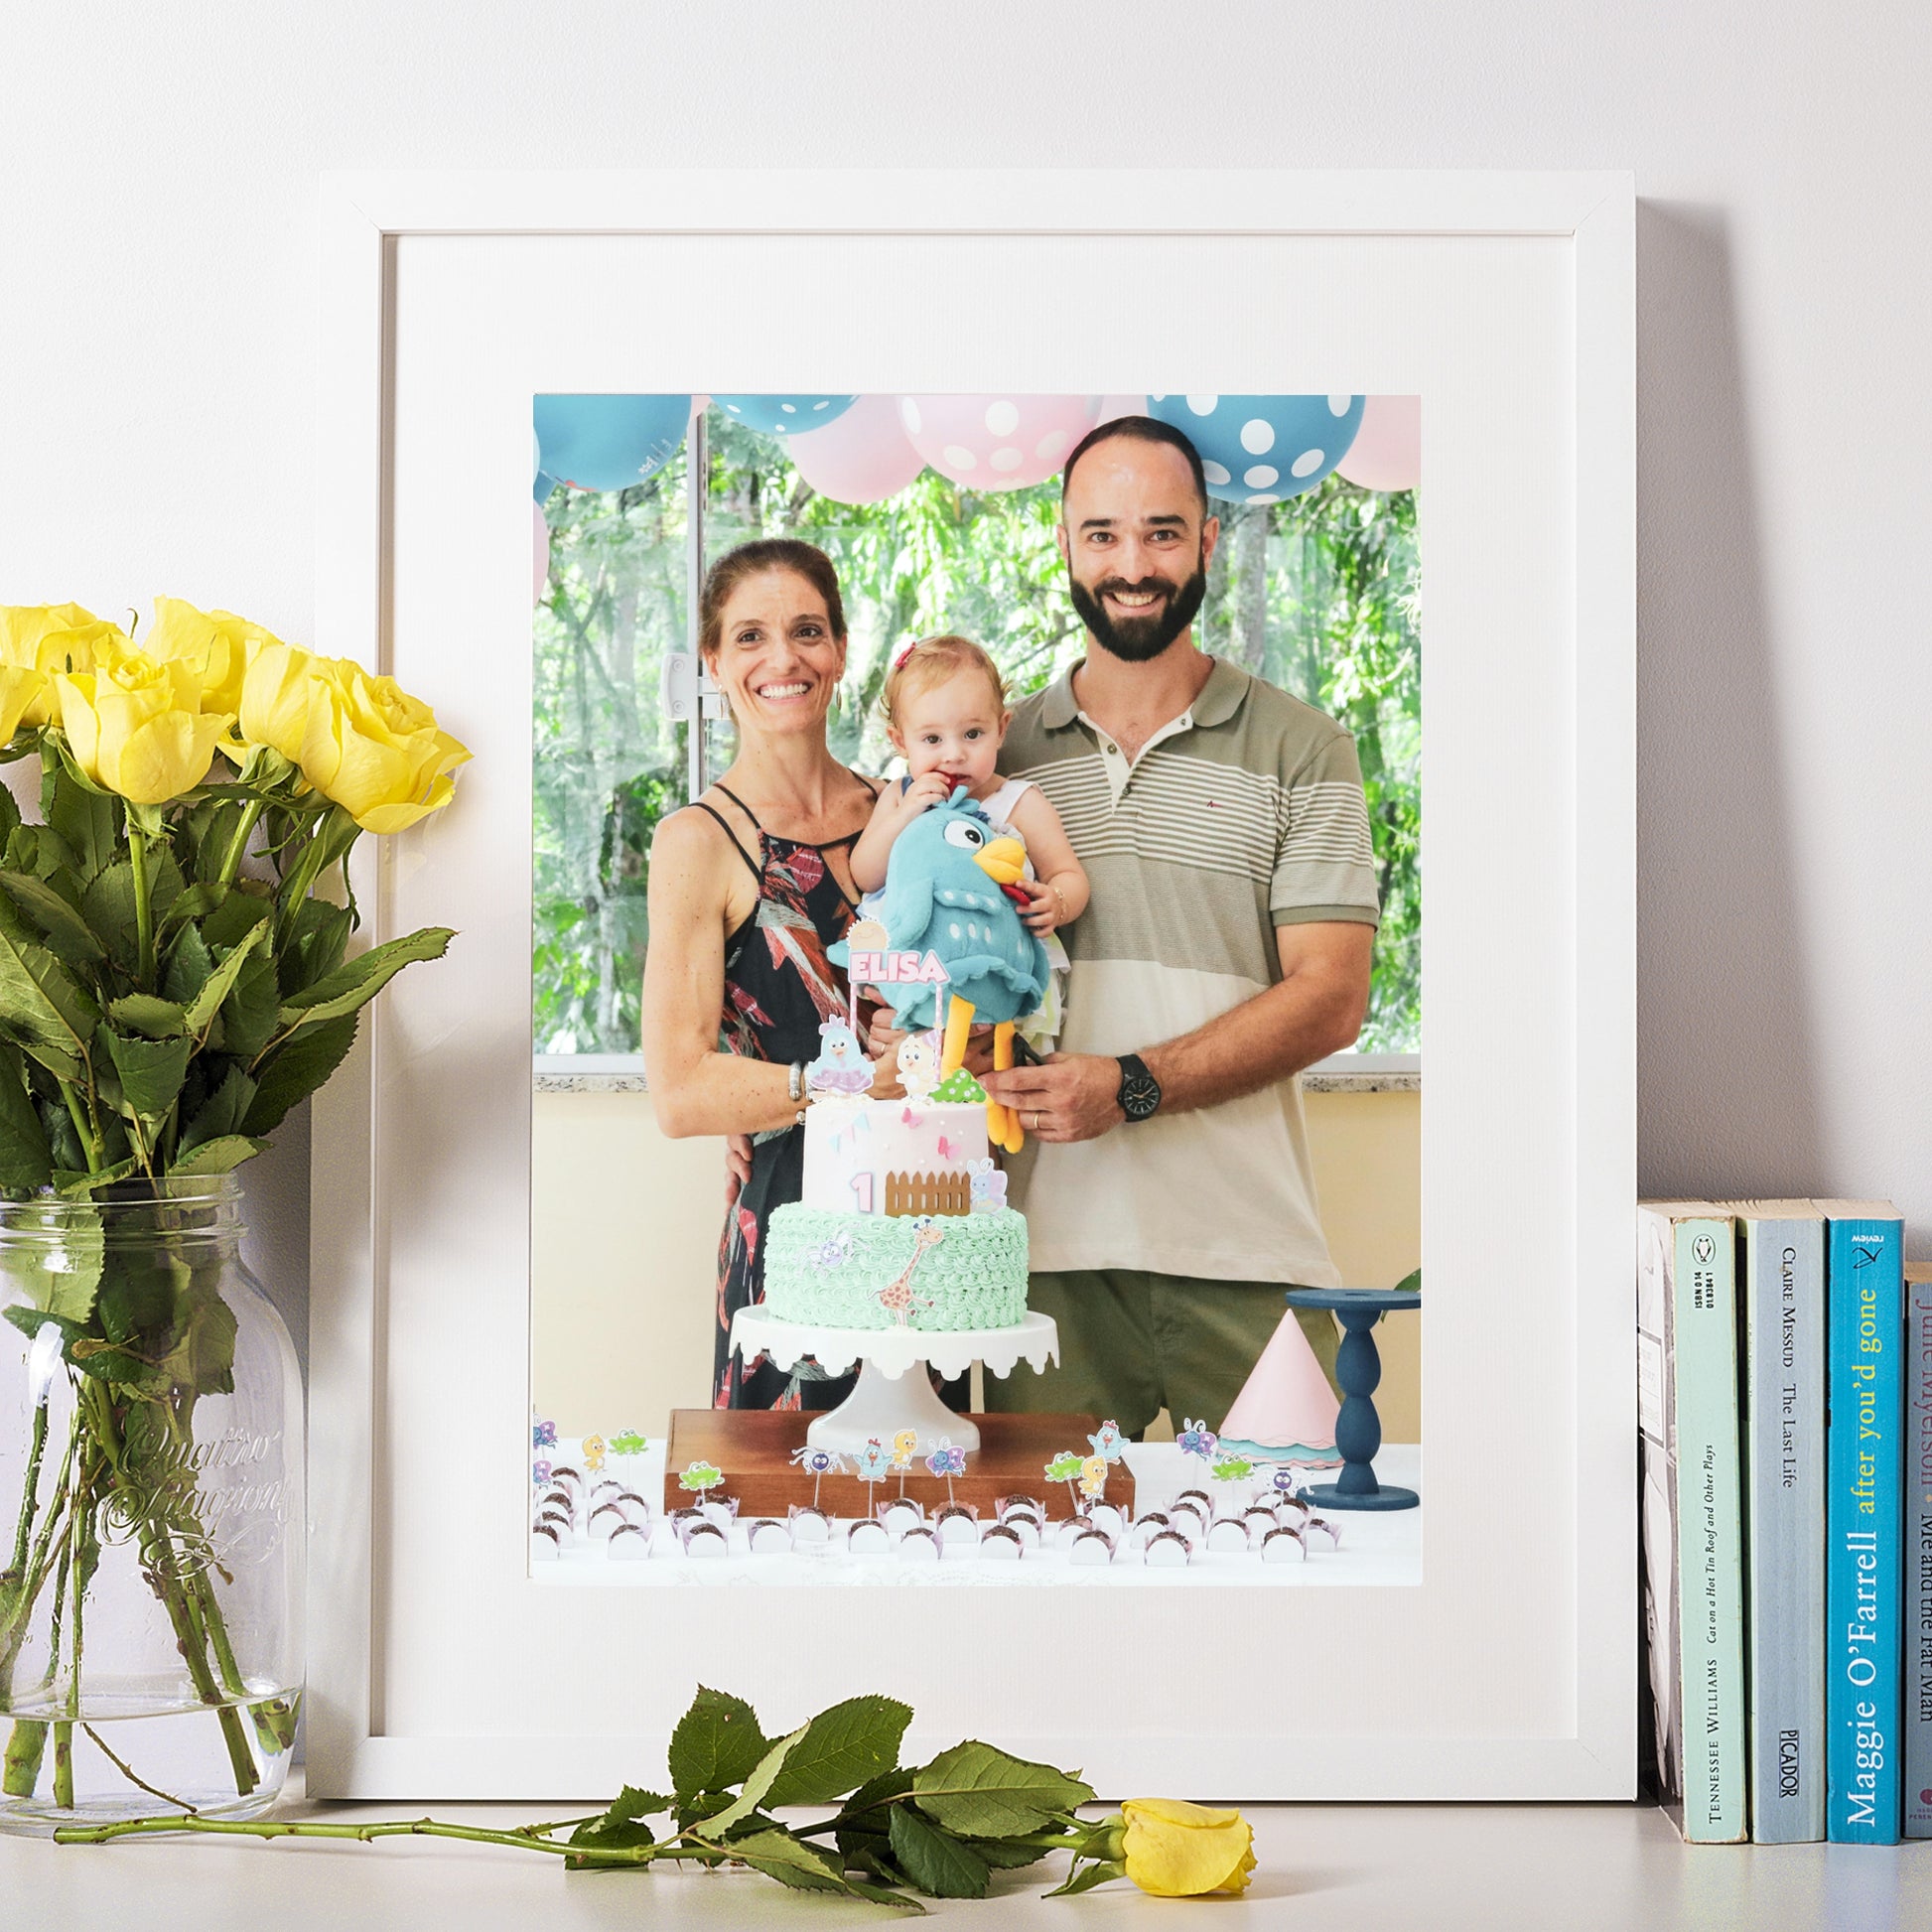 Kids interactive photo print birthday party with cake